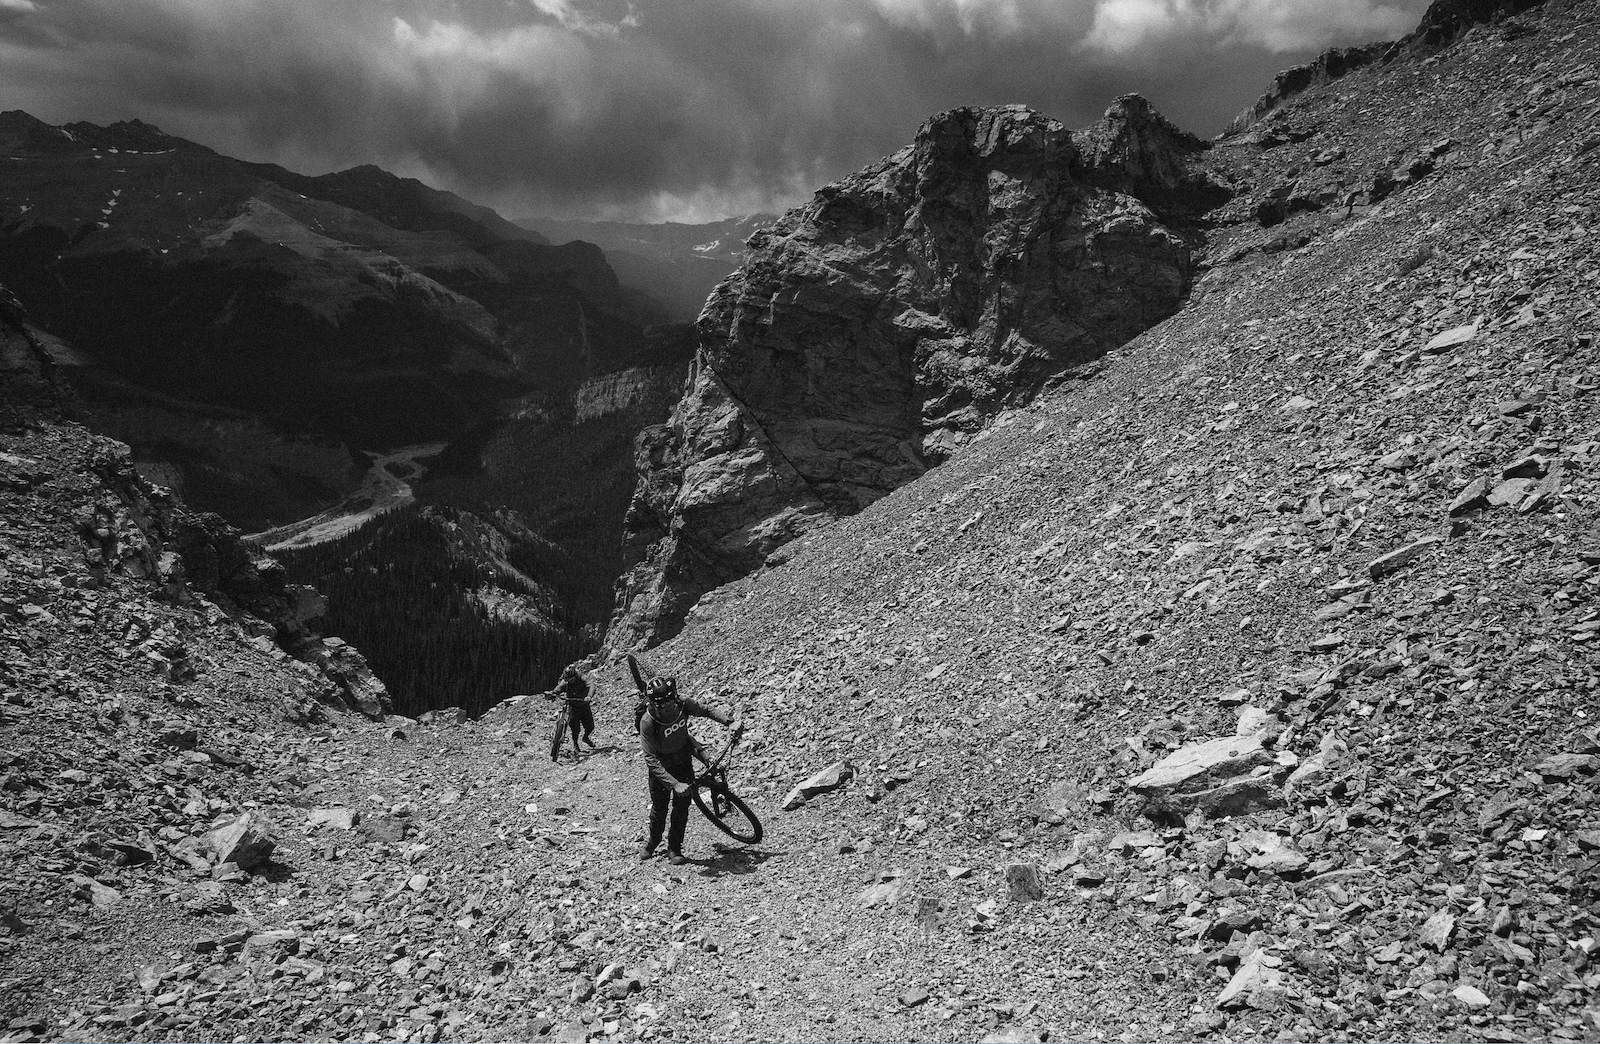 Riding Alberta s Rocky Mountains with Noah Brousseau and Matt Monod. Photos by robb